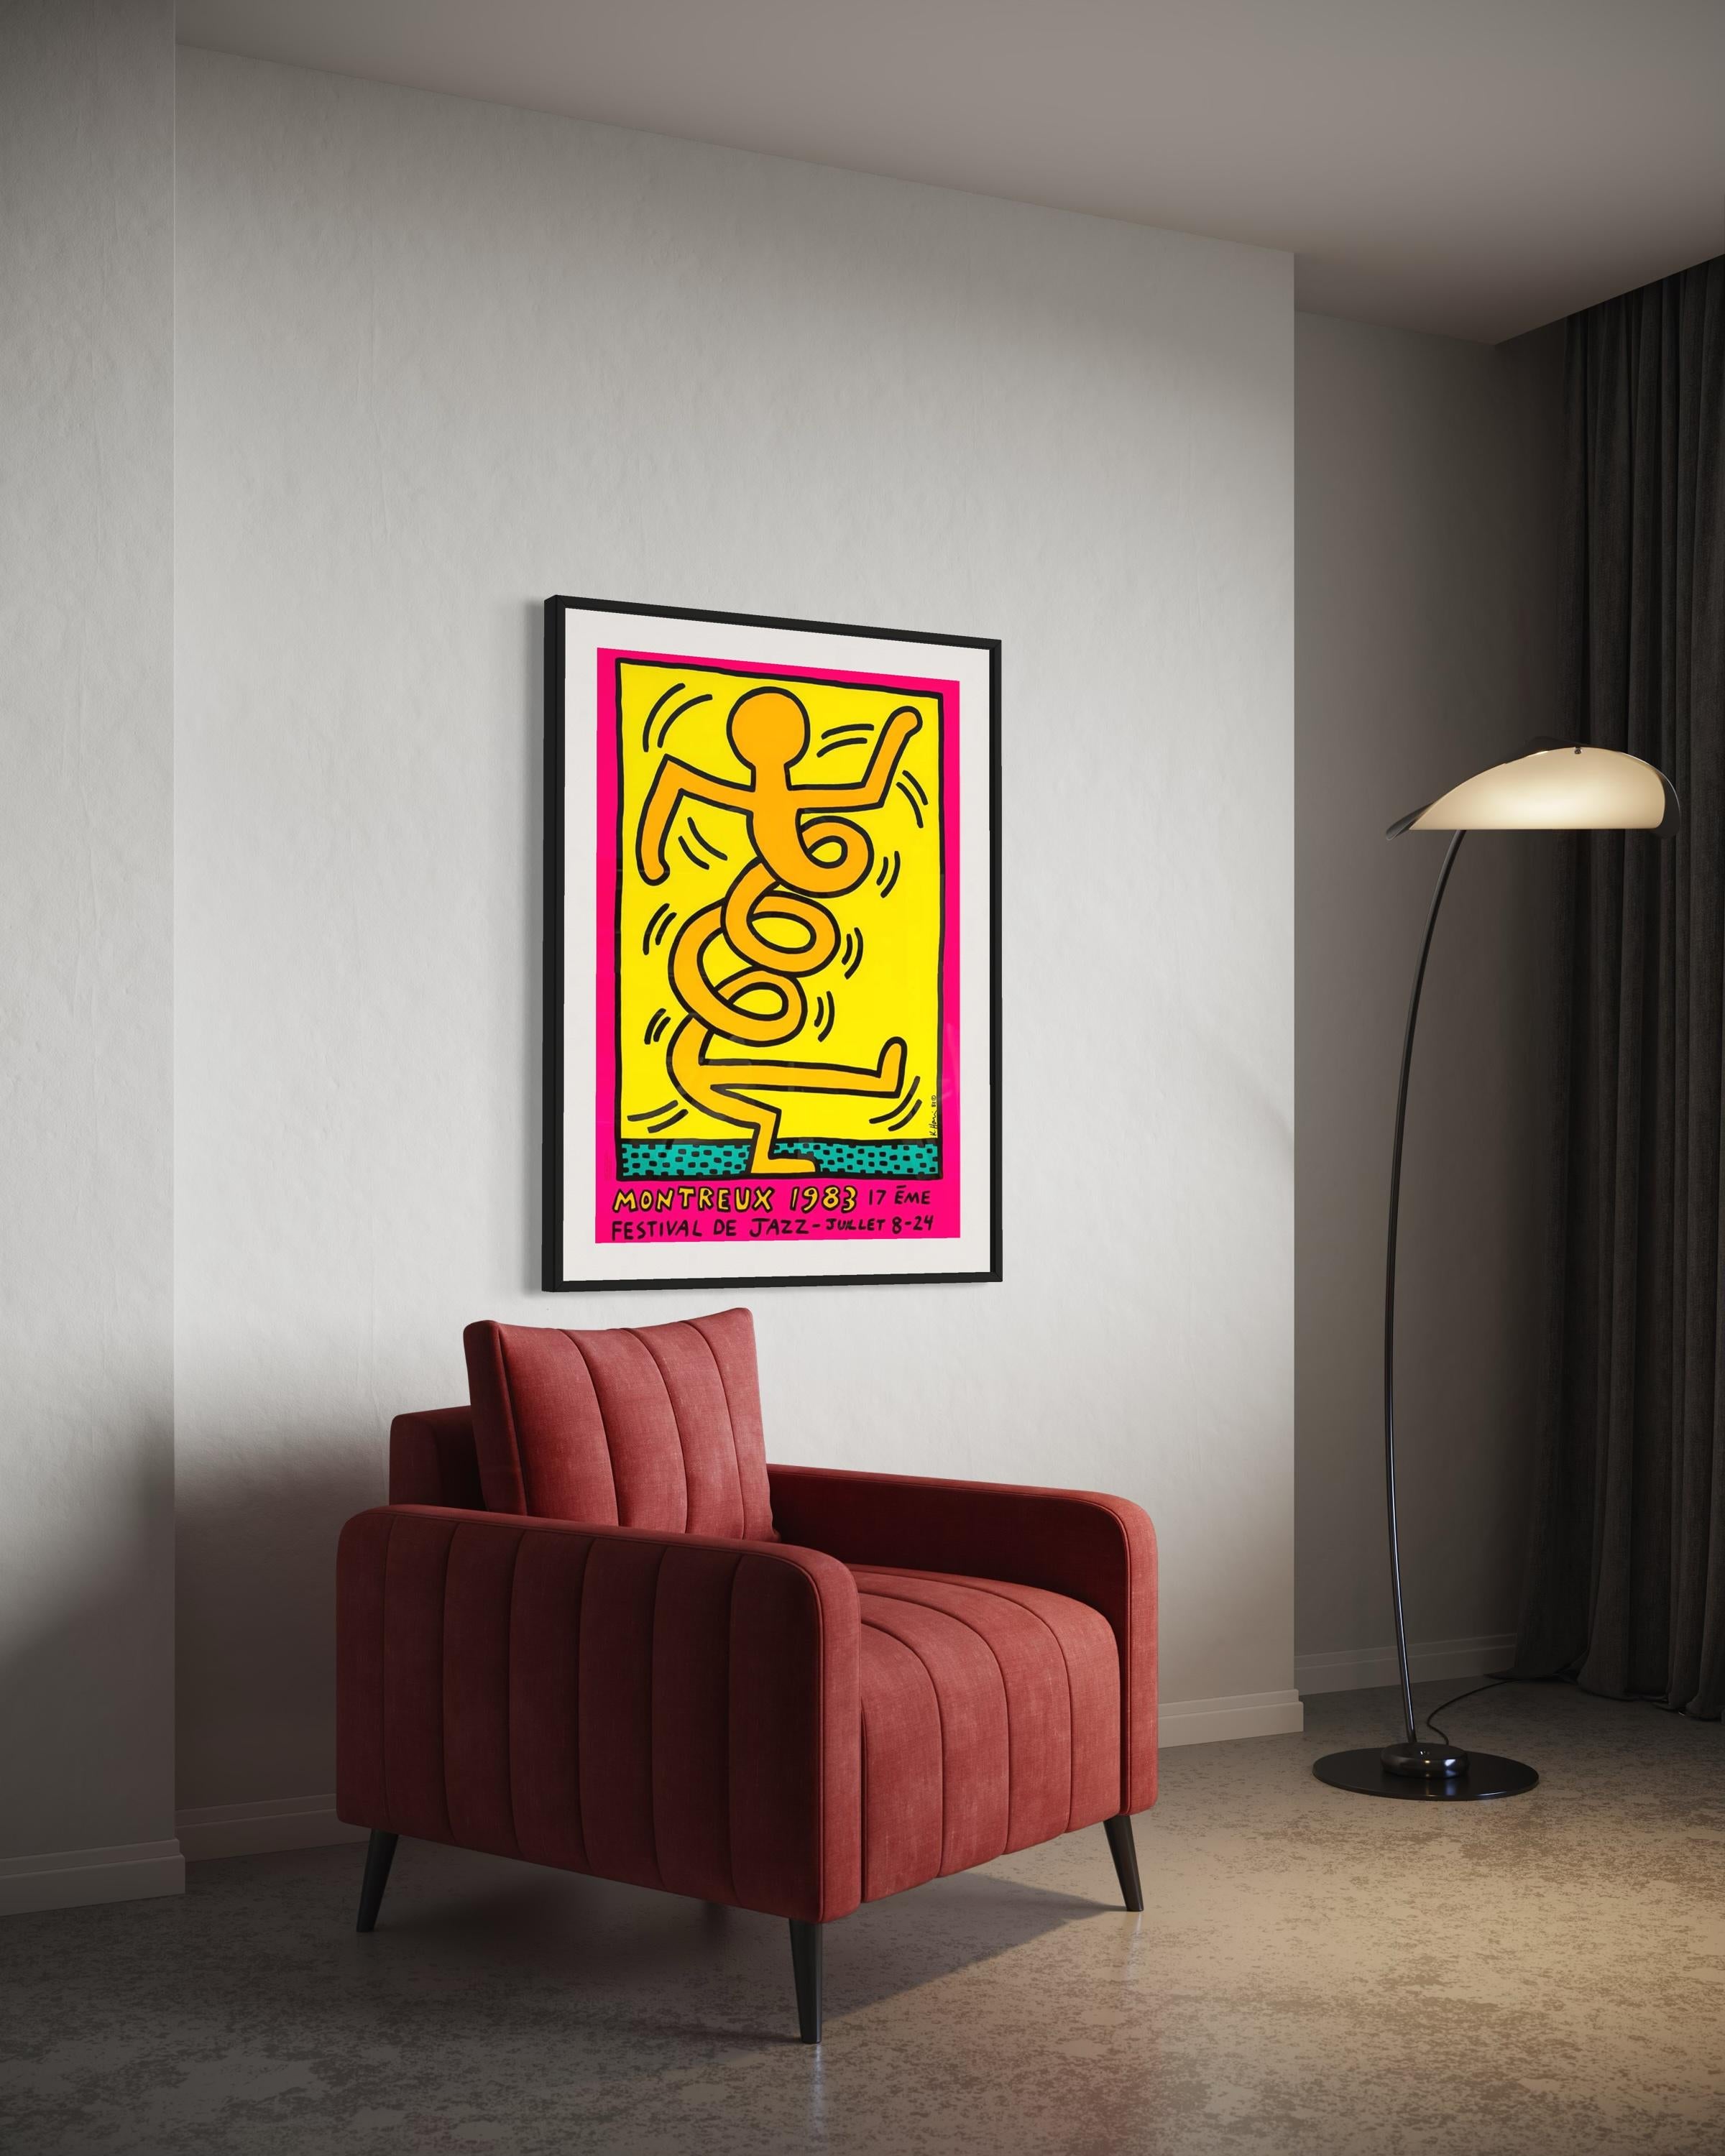 Montreux Jazz Festival 1983 (Pink) - Print by Keith Haring